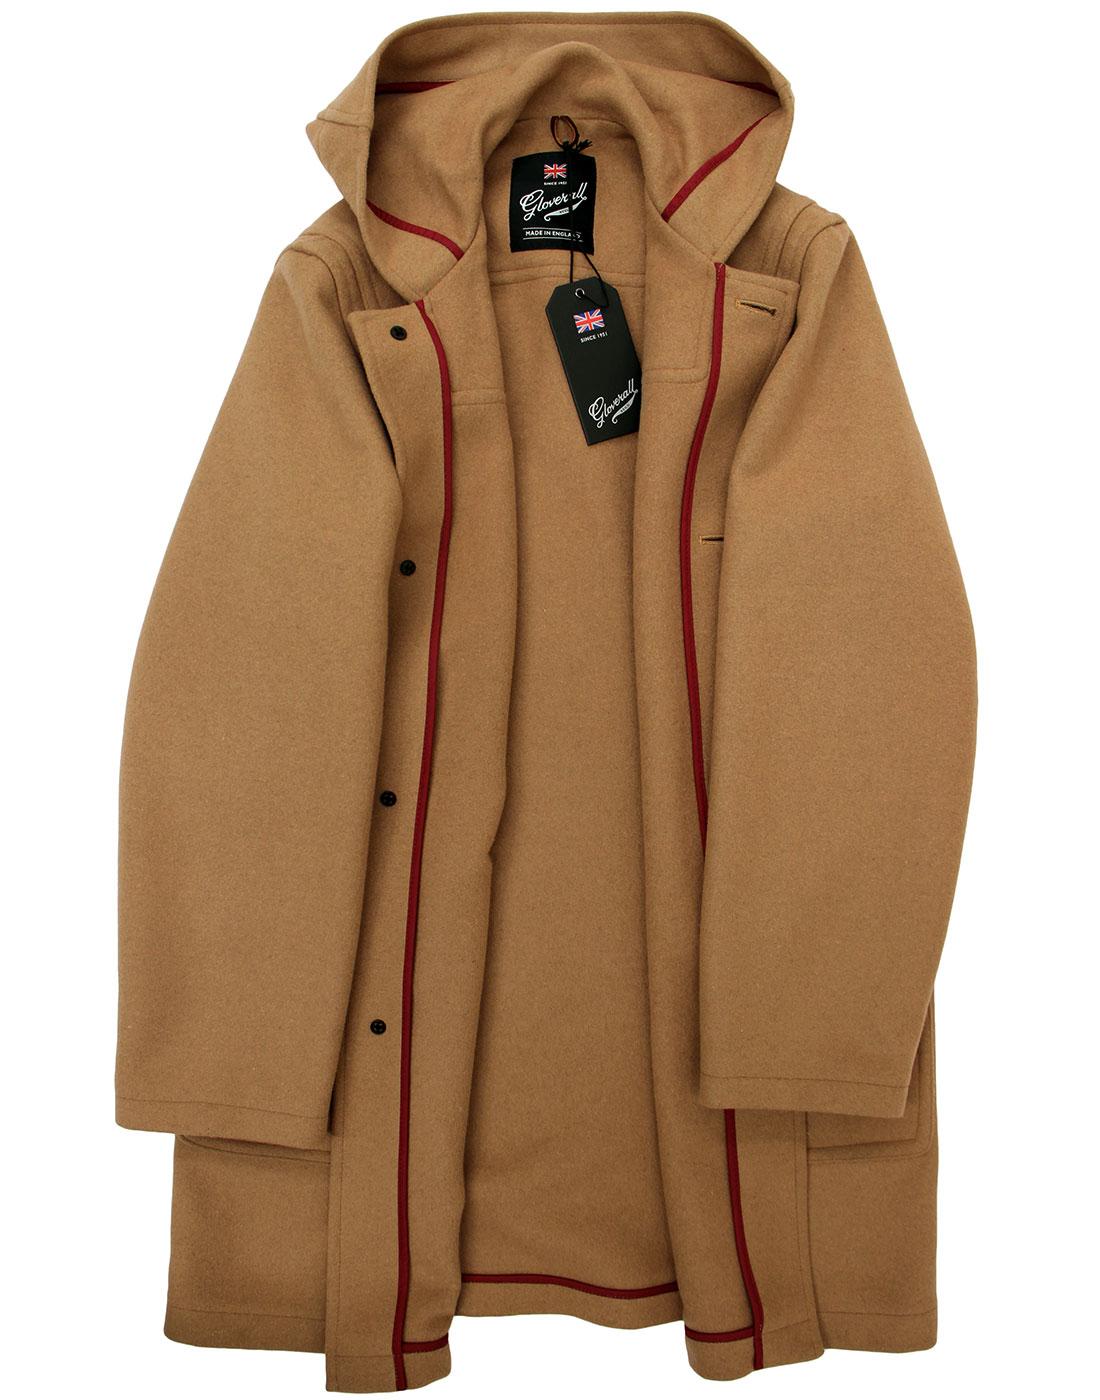 GLOVERALL Made in England 60s Mod Button Duffle Coat in Camel